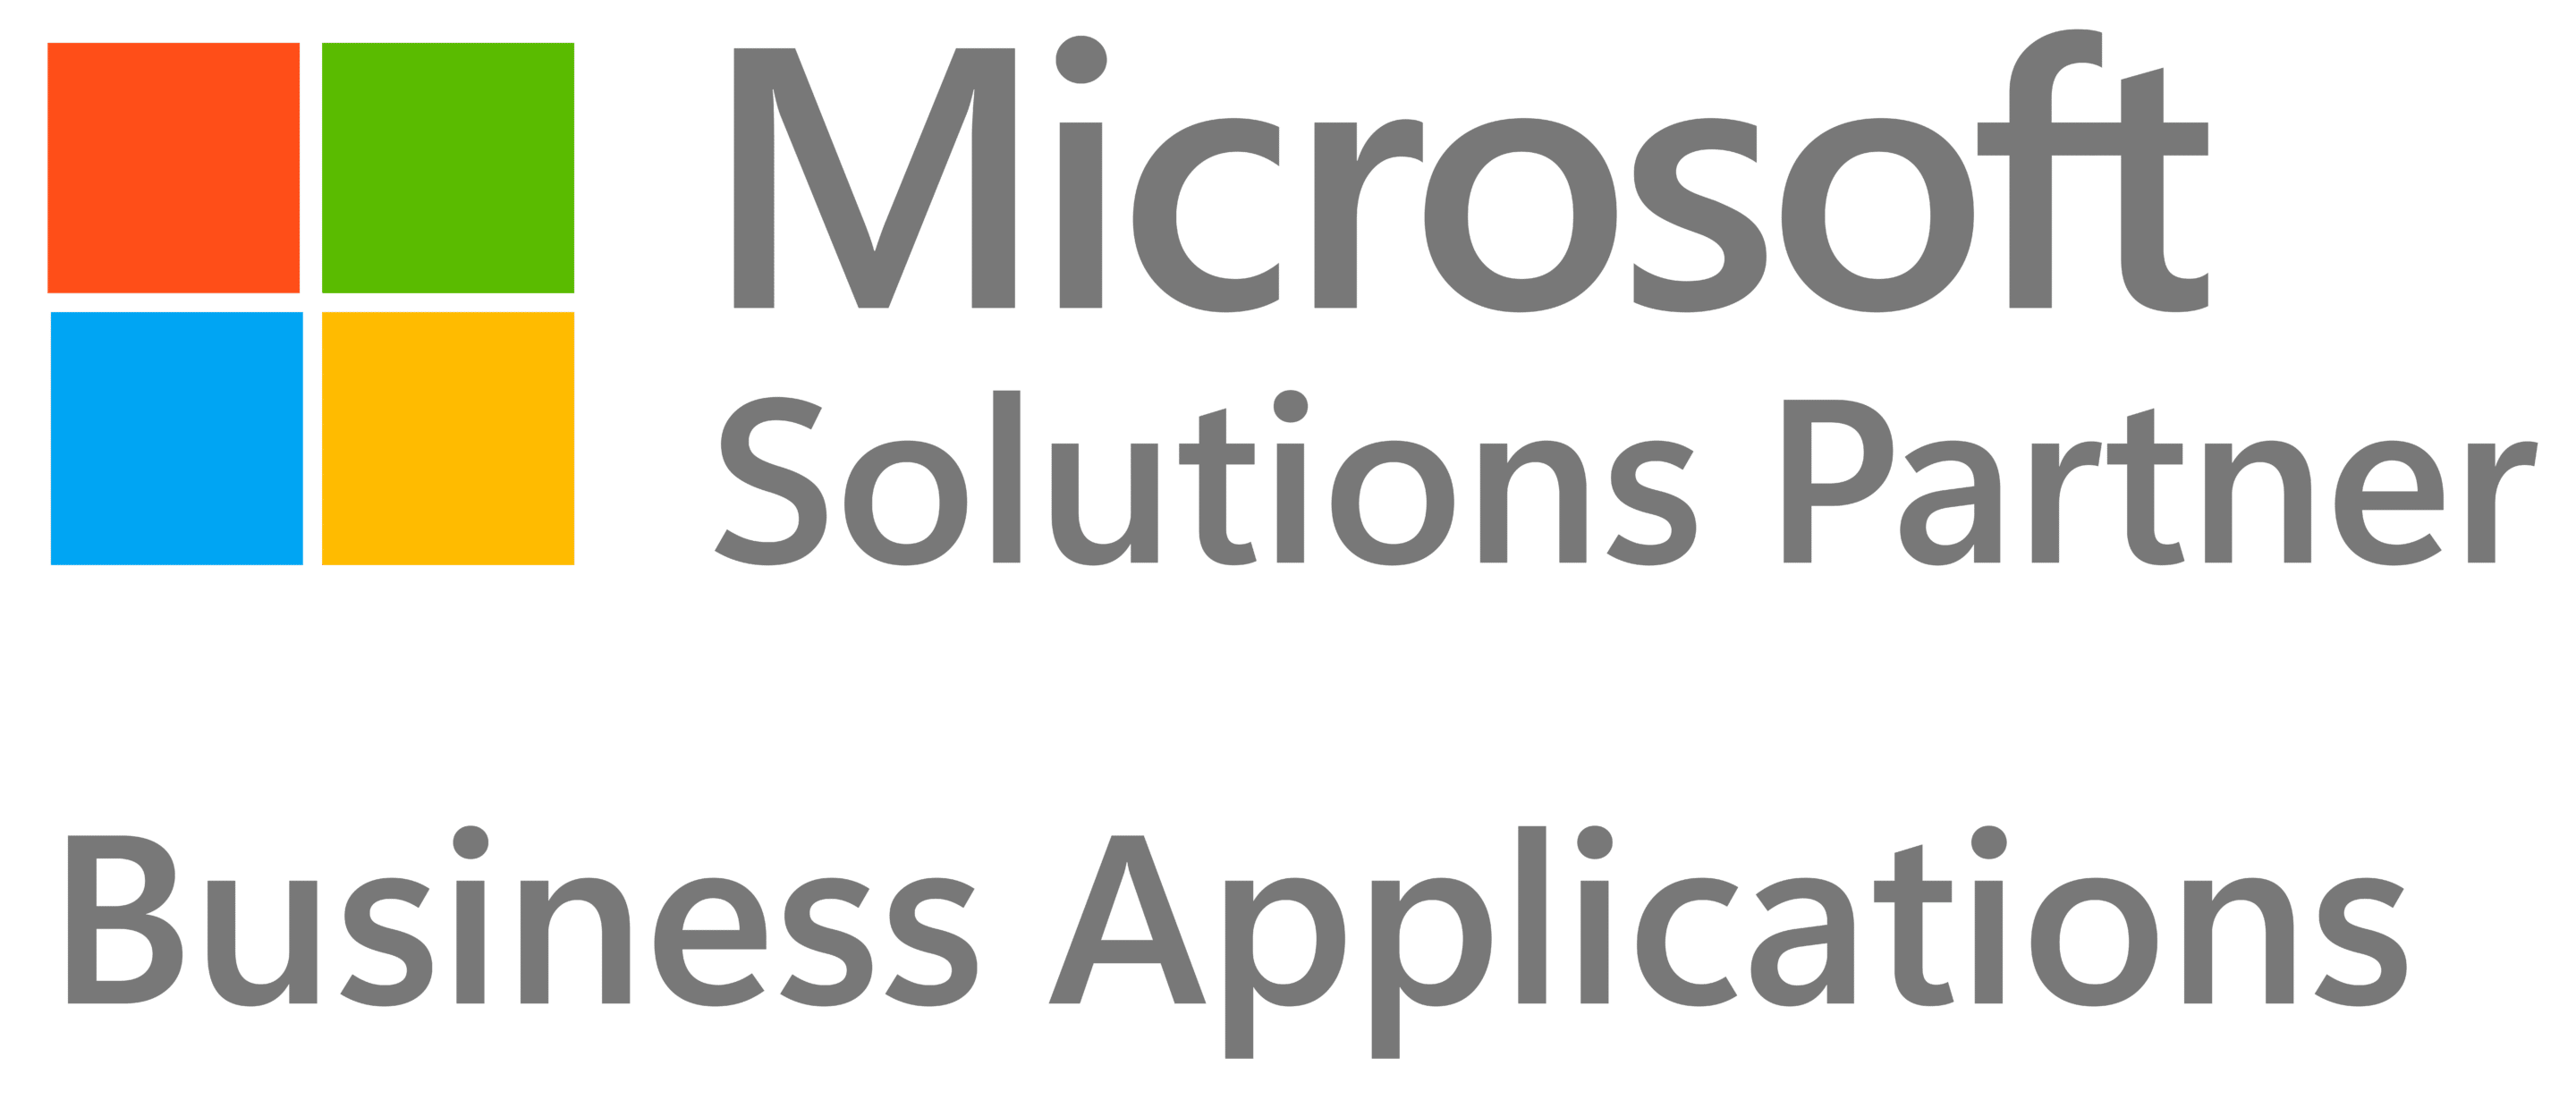 Microsoft Solutions Partner for Business Applications